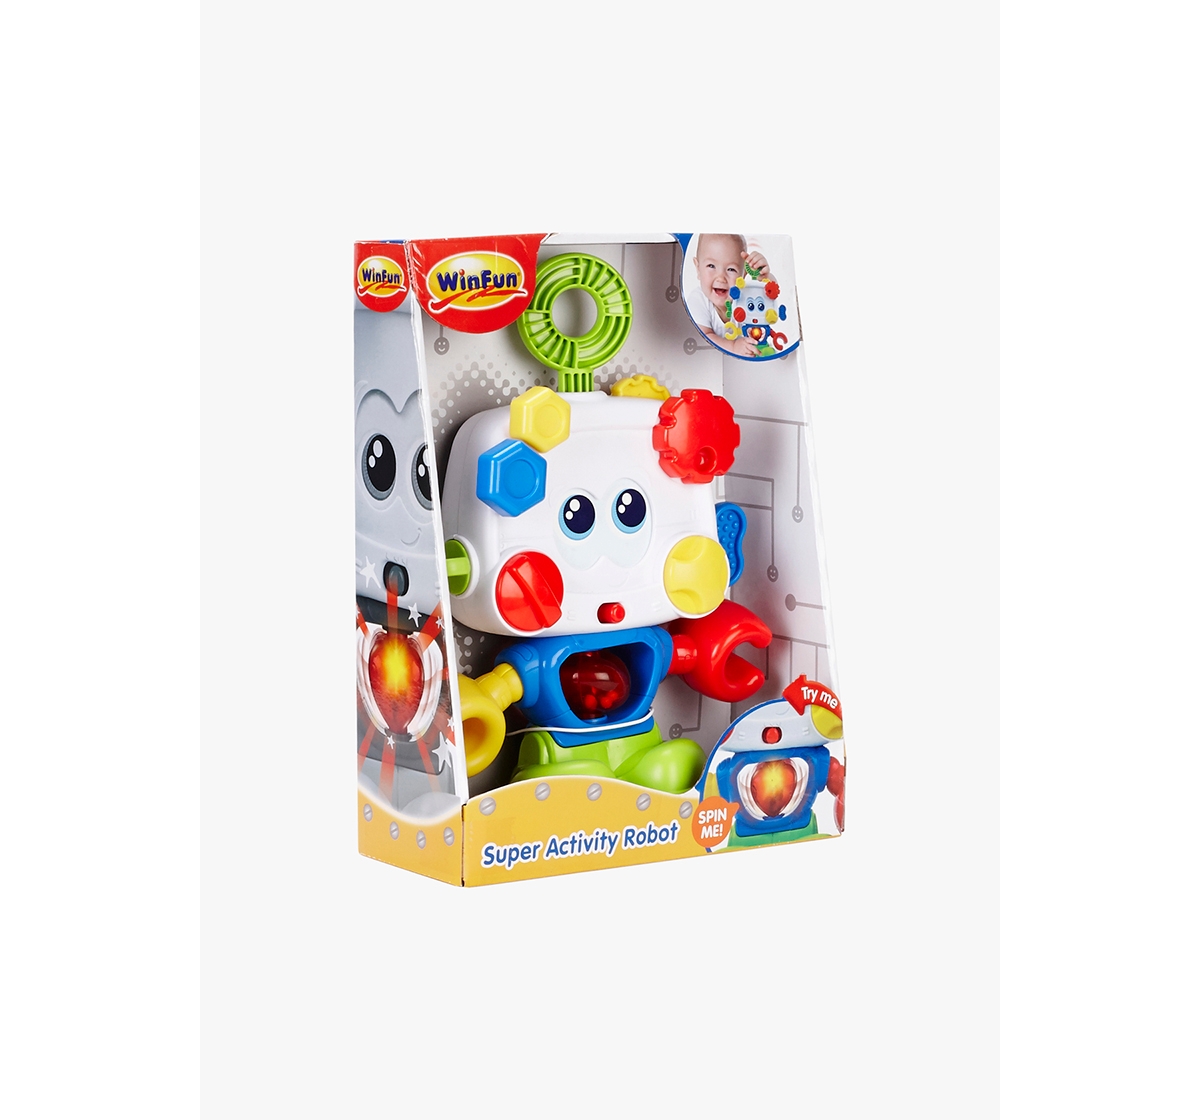 WinFun | Winfun Super Activity Robot Learning Toys for Kids age 9M+ (White) 1